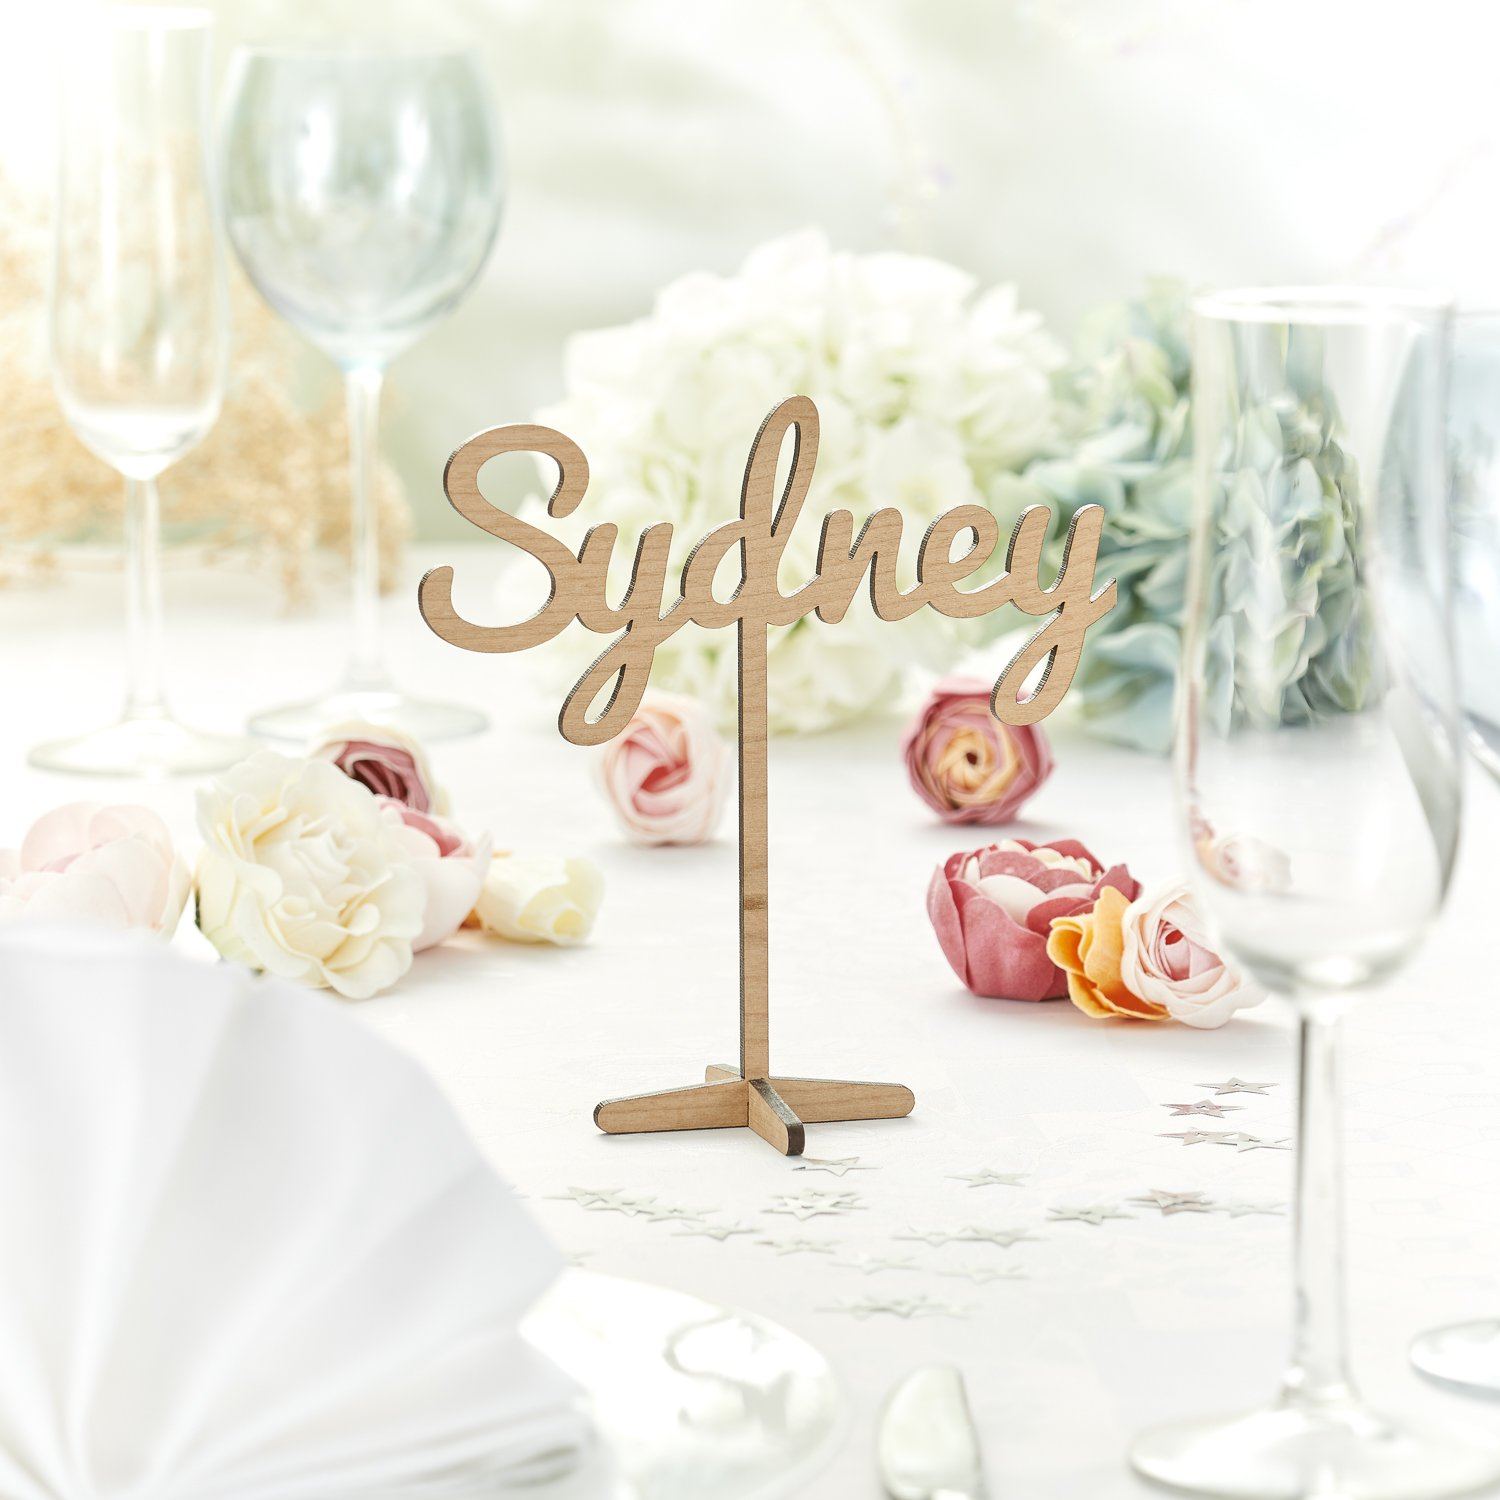 Table Numbers And Names - Rustic Wooden Wedding Table Names